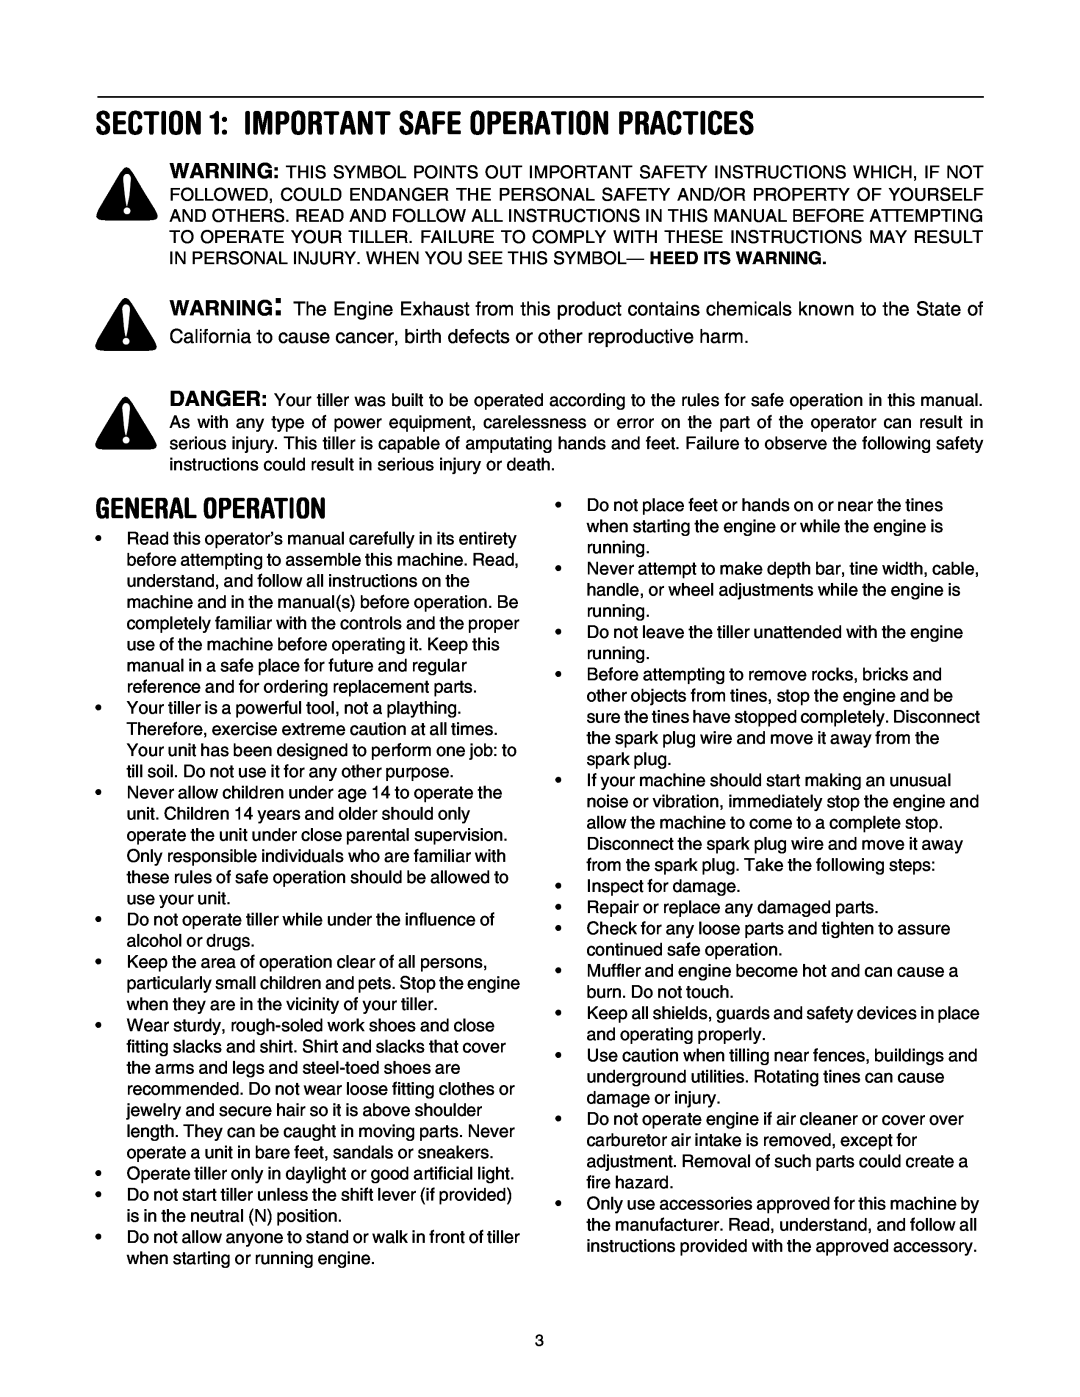 Yard-Man RT65 manual Important Safe Operation Practices, General Operation 